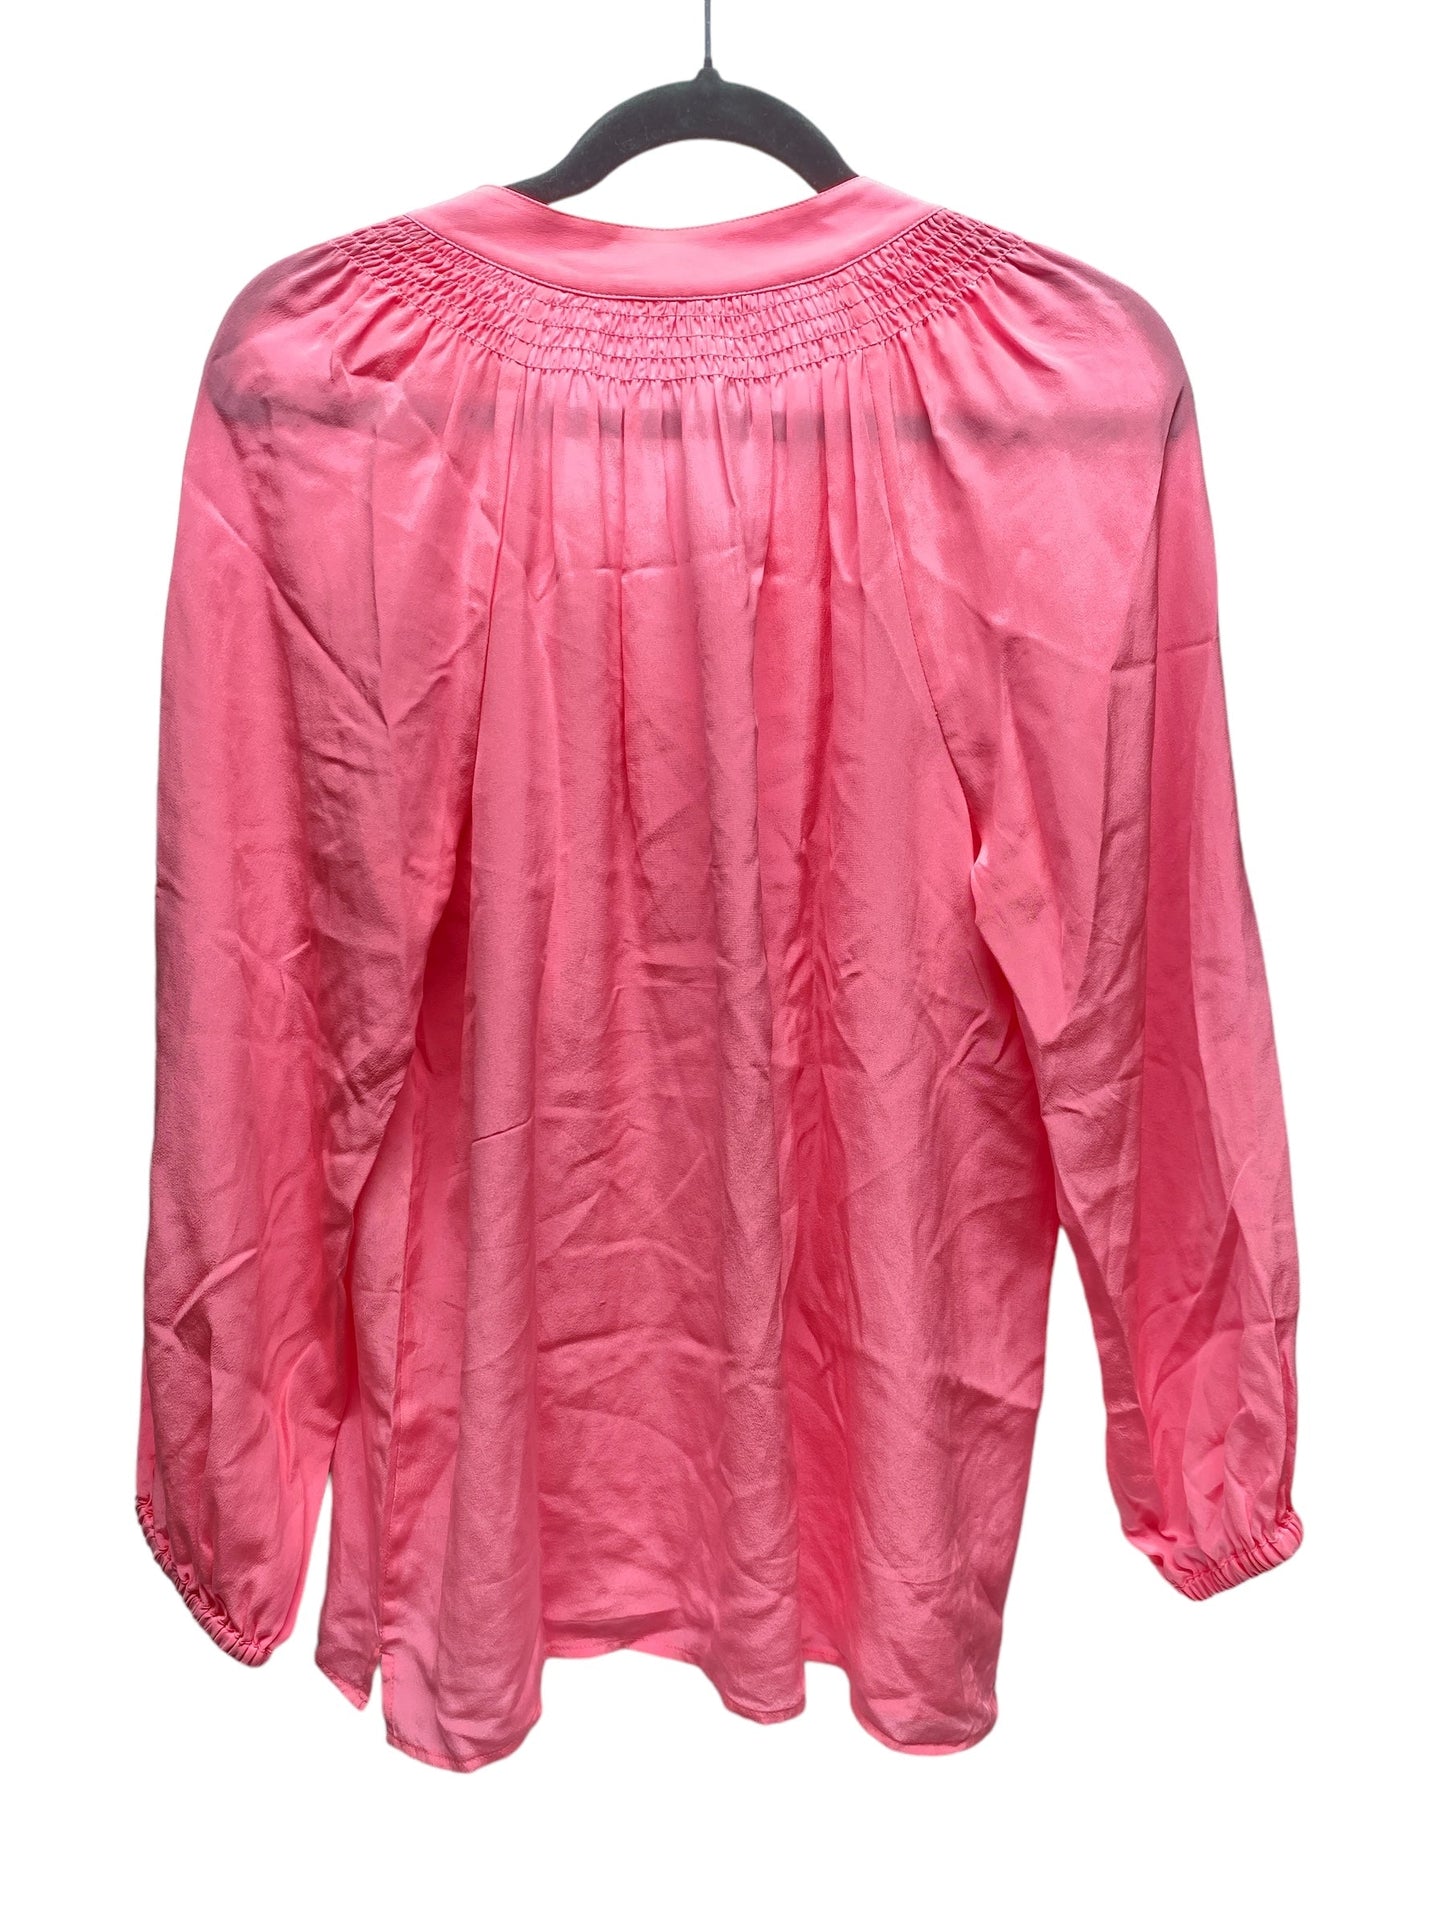 Pink Top Long Sleeve Designer Lilly Pulitzer, Size M